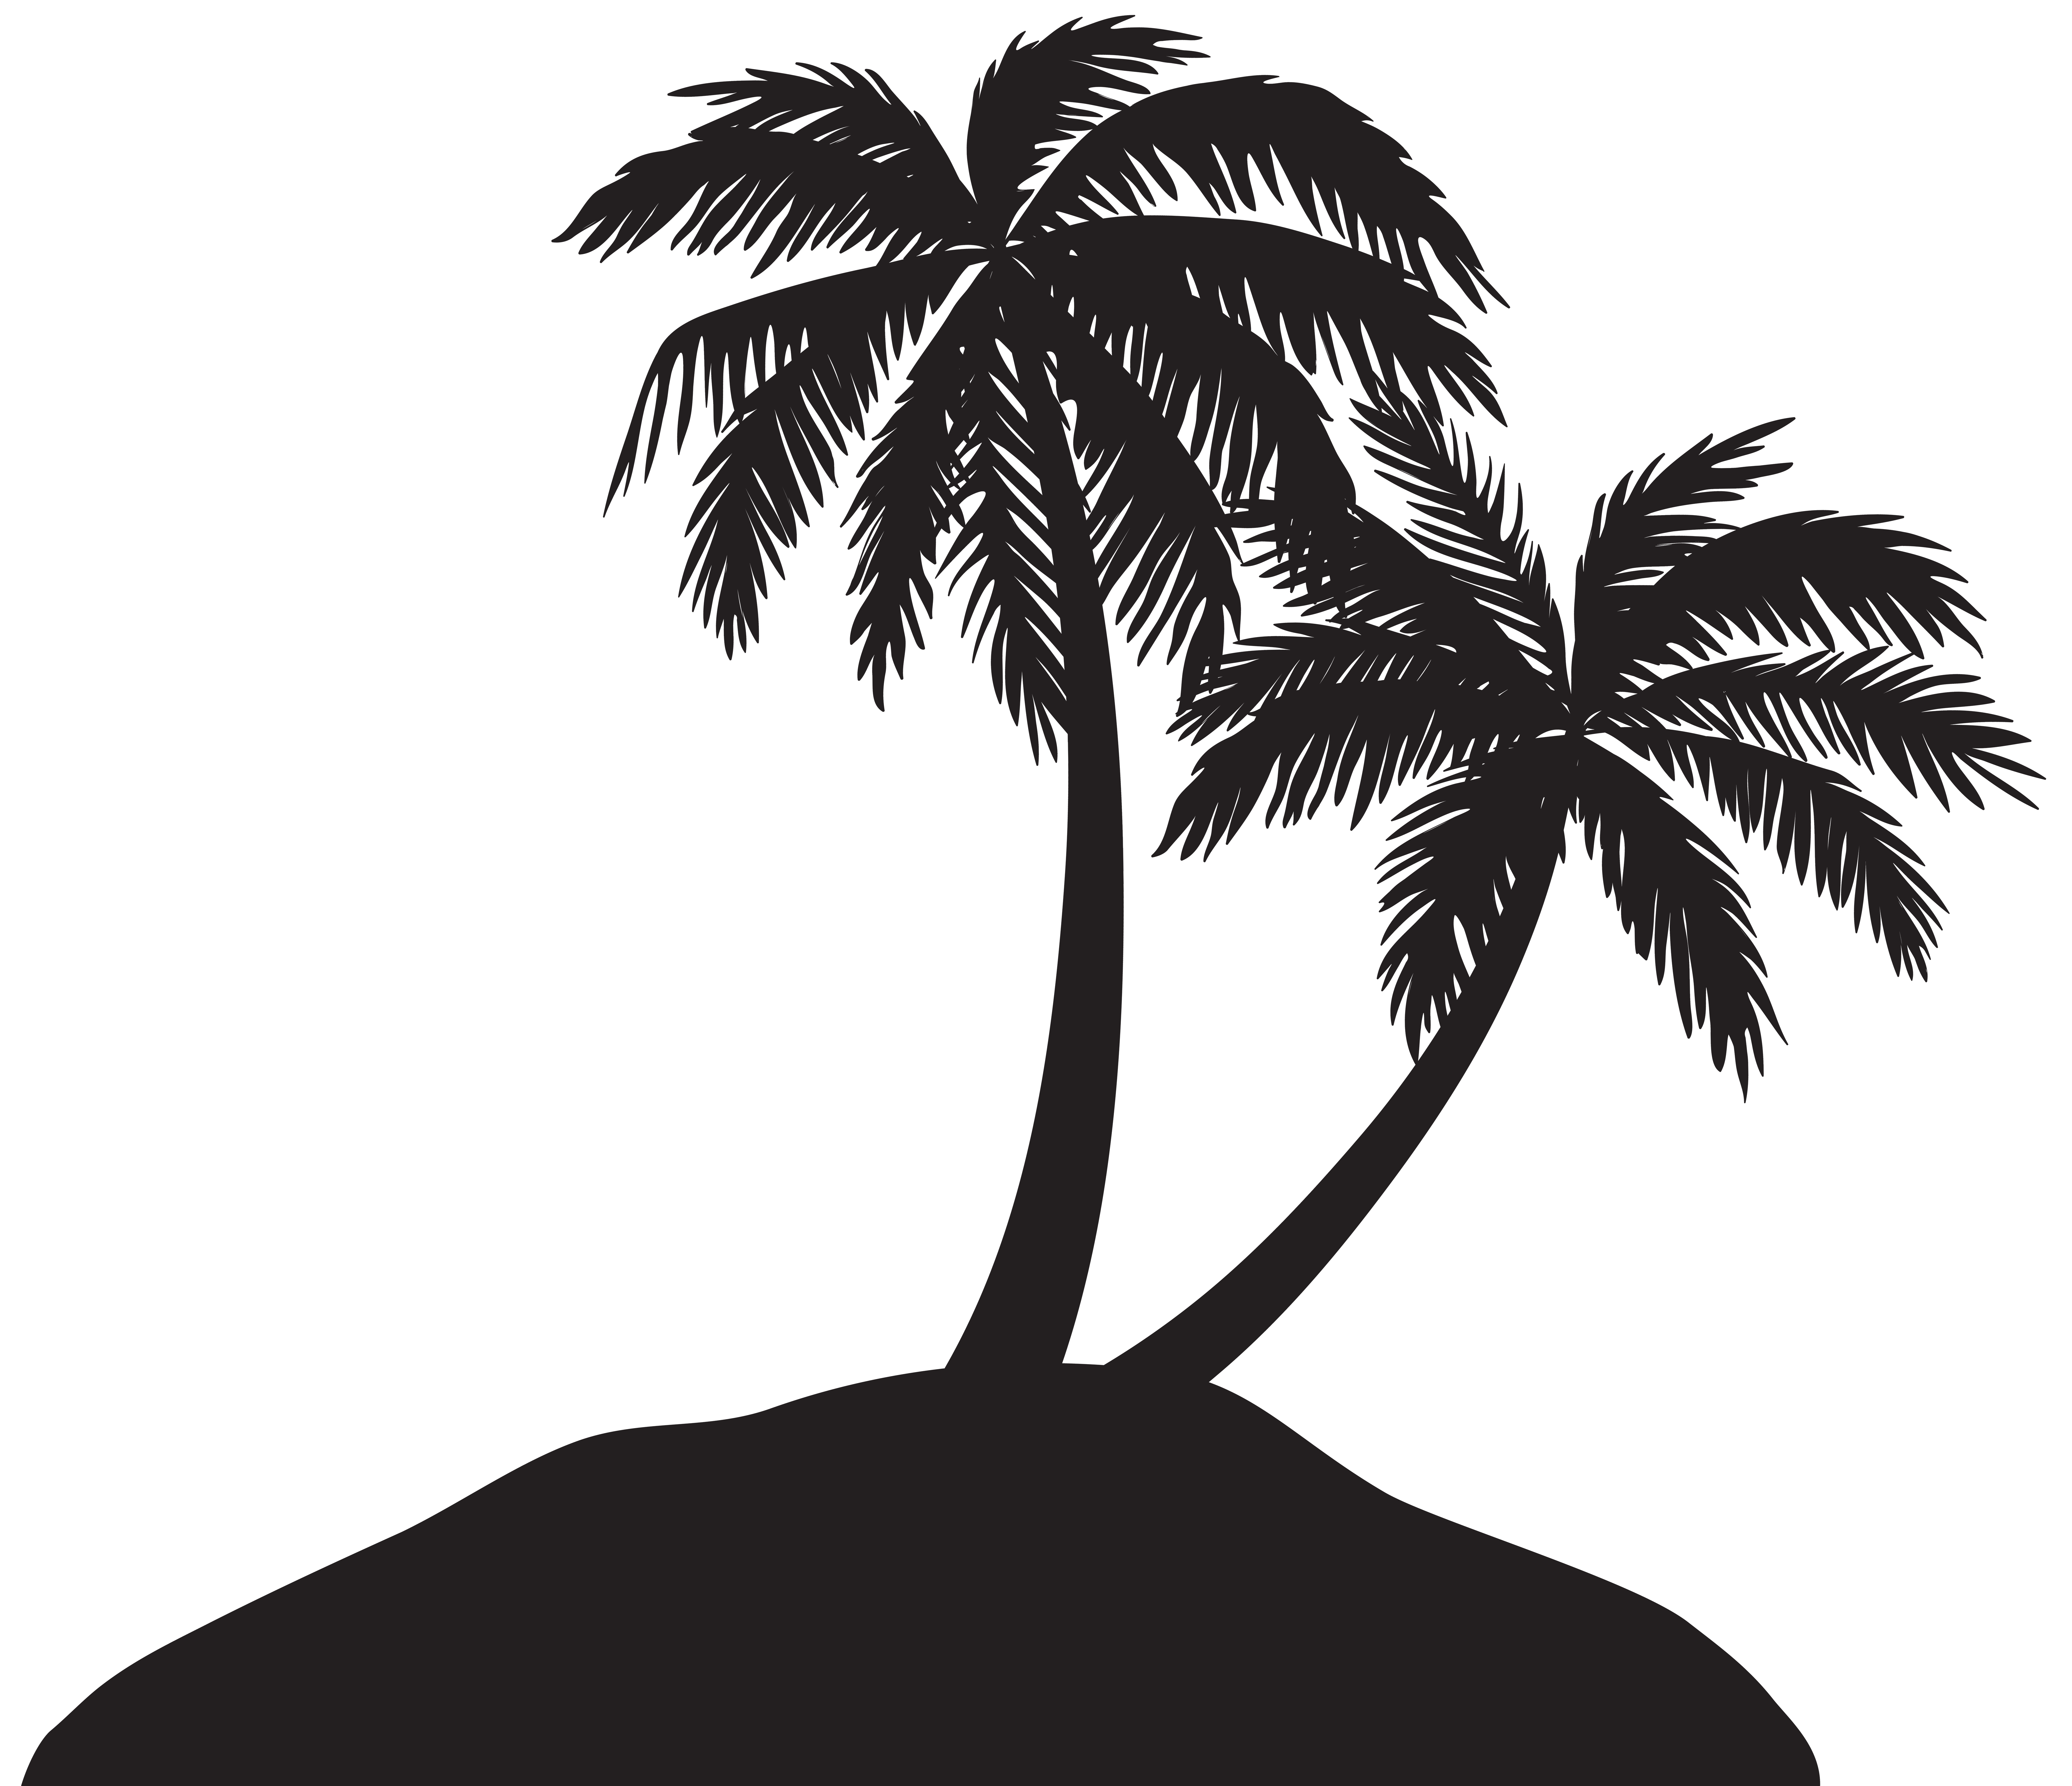 Water clipart palm tree. Island with trees silhouette